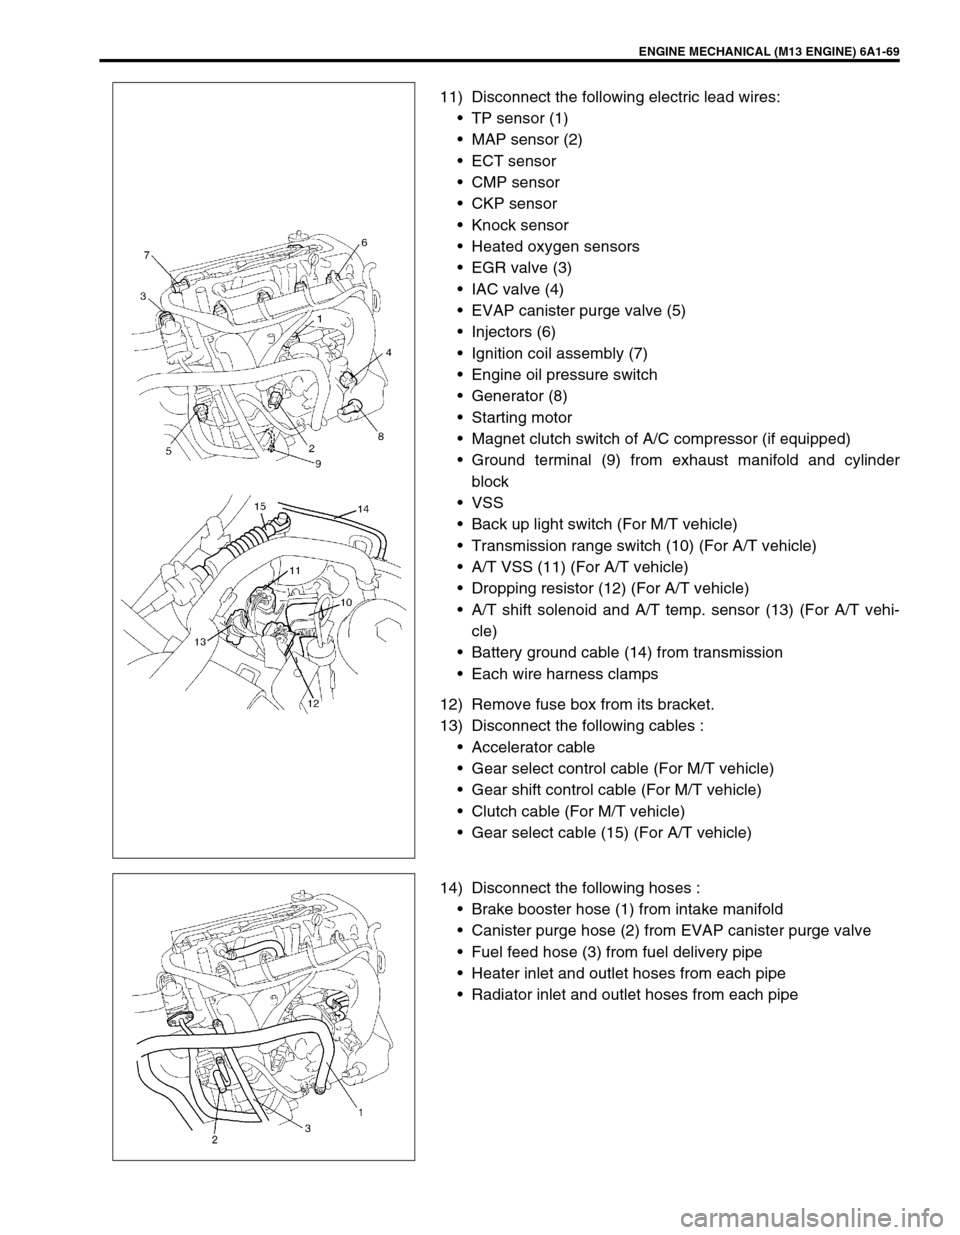 SUZUKI SWIFT 2000 1.G RG413 Service Workshop Manual ENGINE MECHANICAL (M13 ENGINE) 6A1-69
11) Disconnect the following electric lead wires:
TP sensor (1)
MAP sensor (2)
ECT sensor
CMP sensor
CKP sensor
Knock sensor
Heated oxygen sensors
EGR val